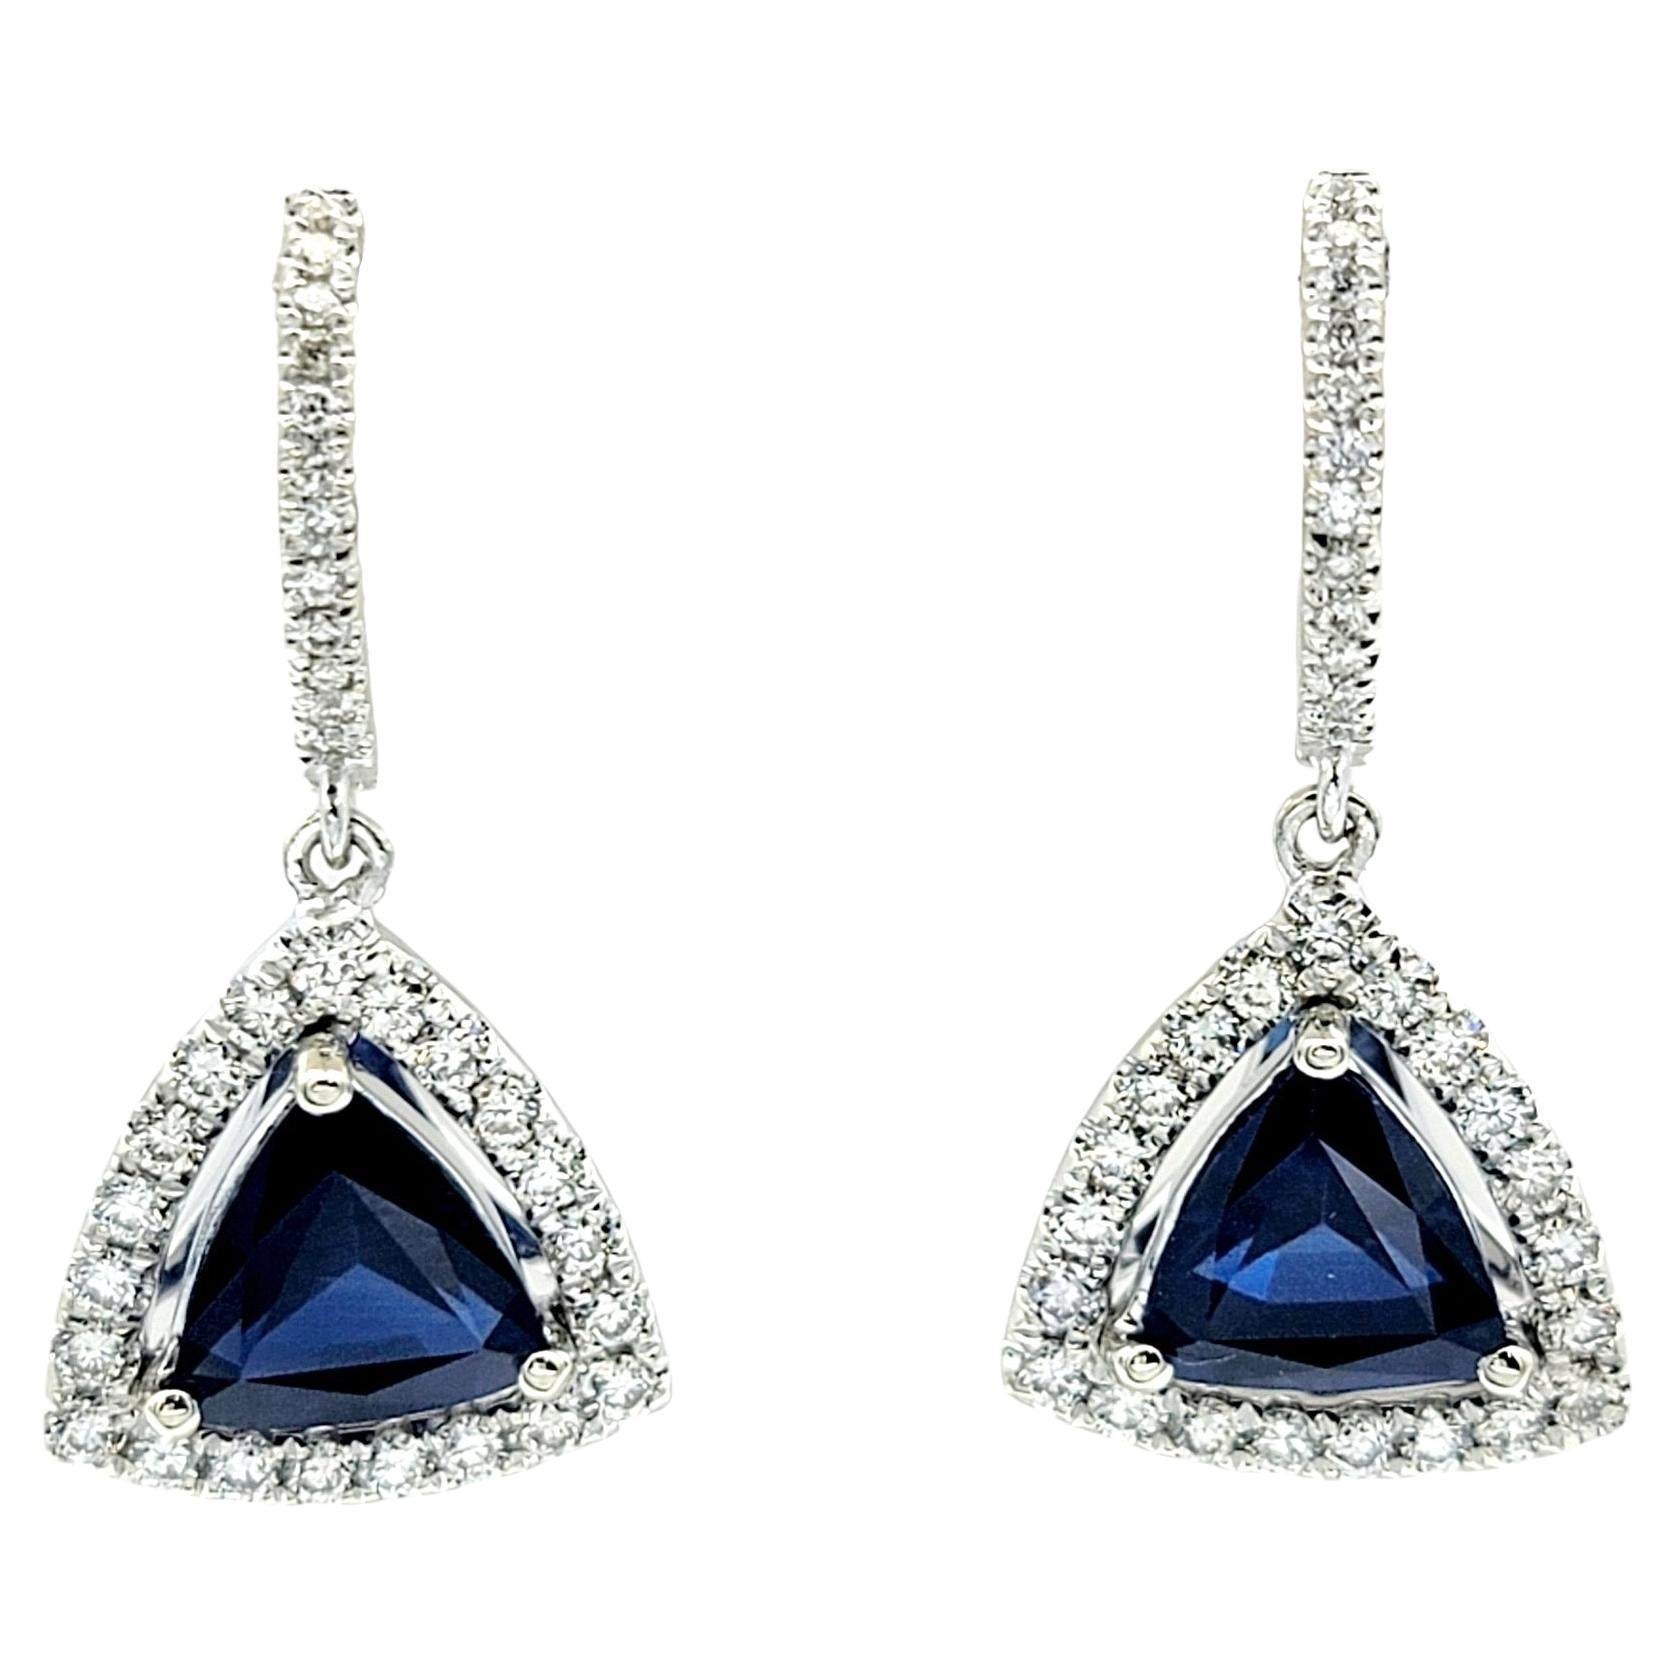 3.07 Carat Total Triangle Cut Sapphire and Diamond Drop Earrings in White Gold  For Sale